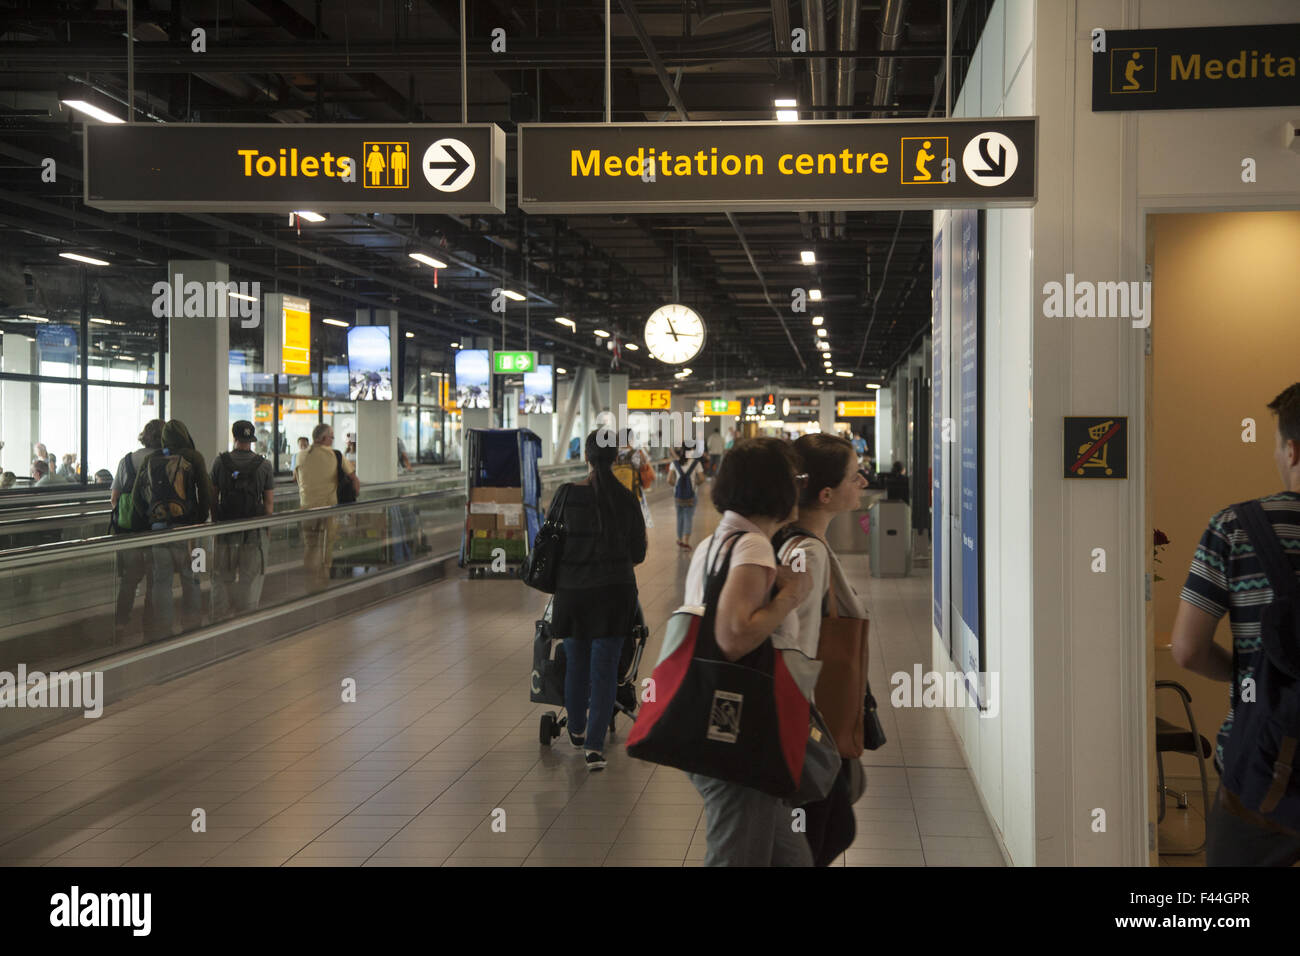 Shiphol International Airport has a meditation center for travelers. Amsterdam, NL Stock Photo